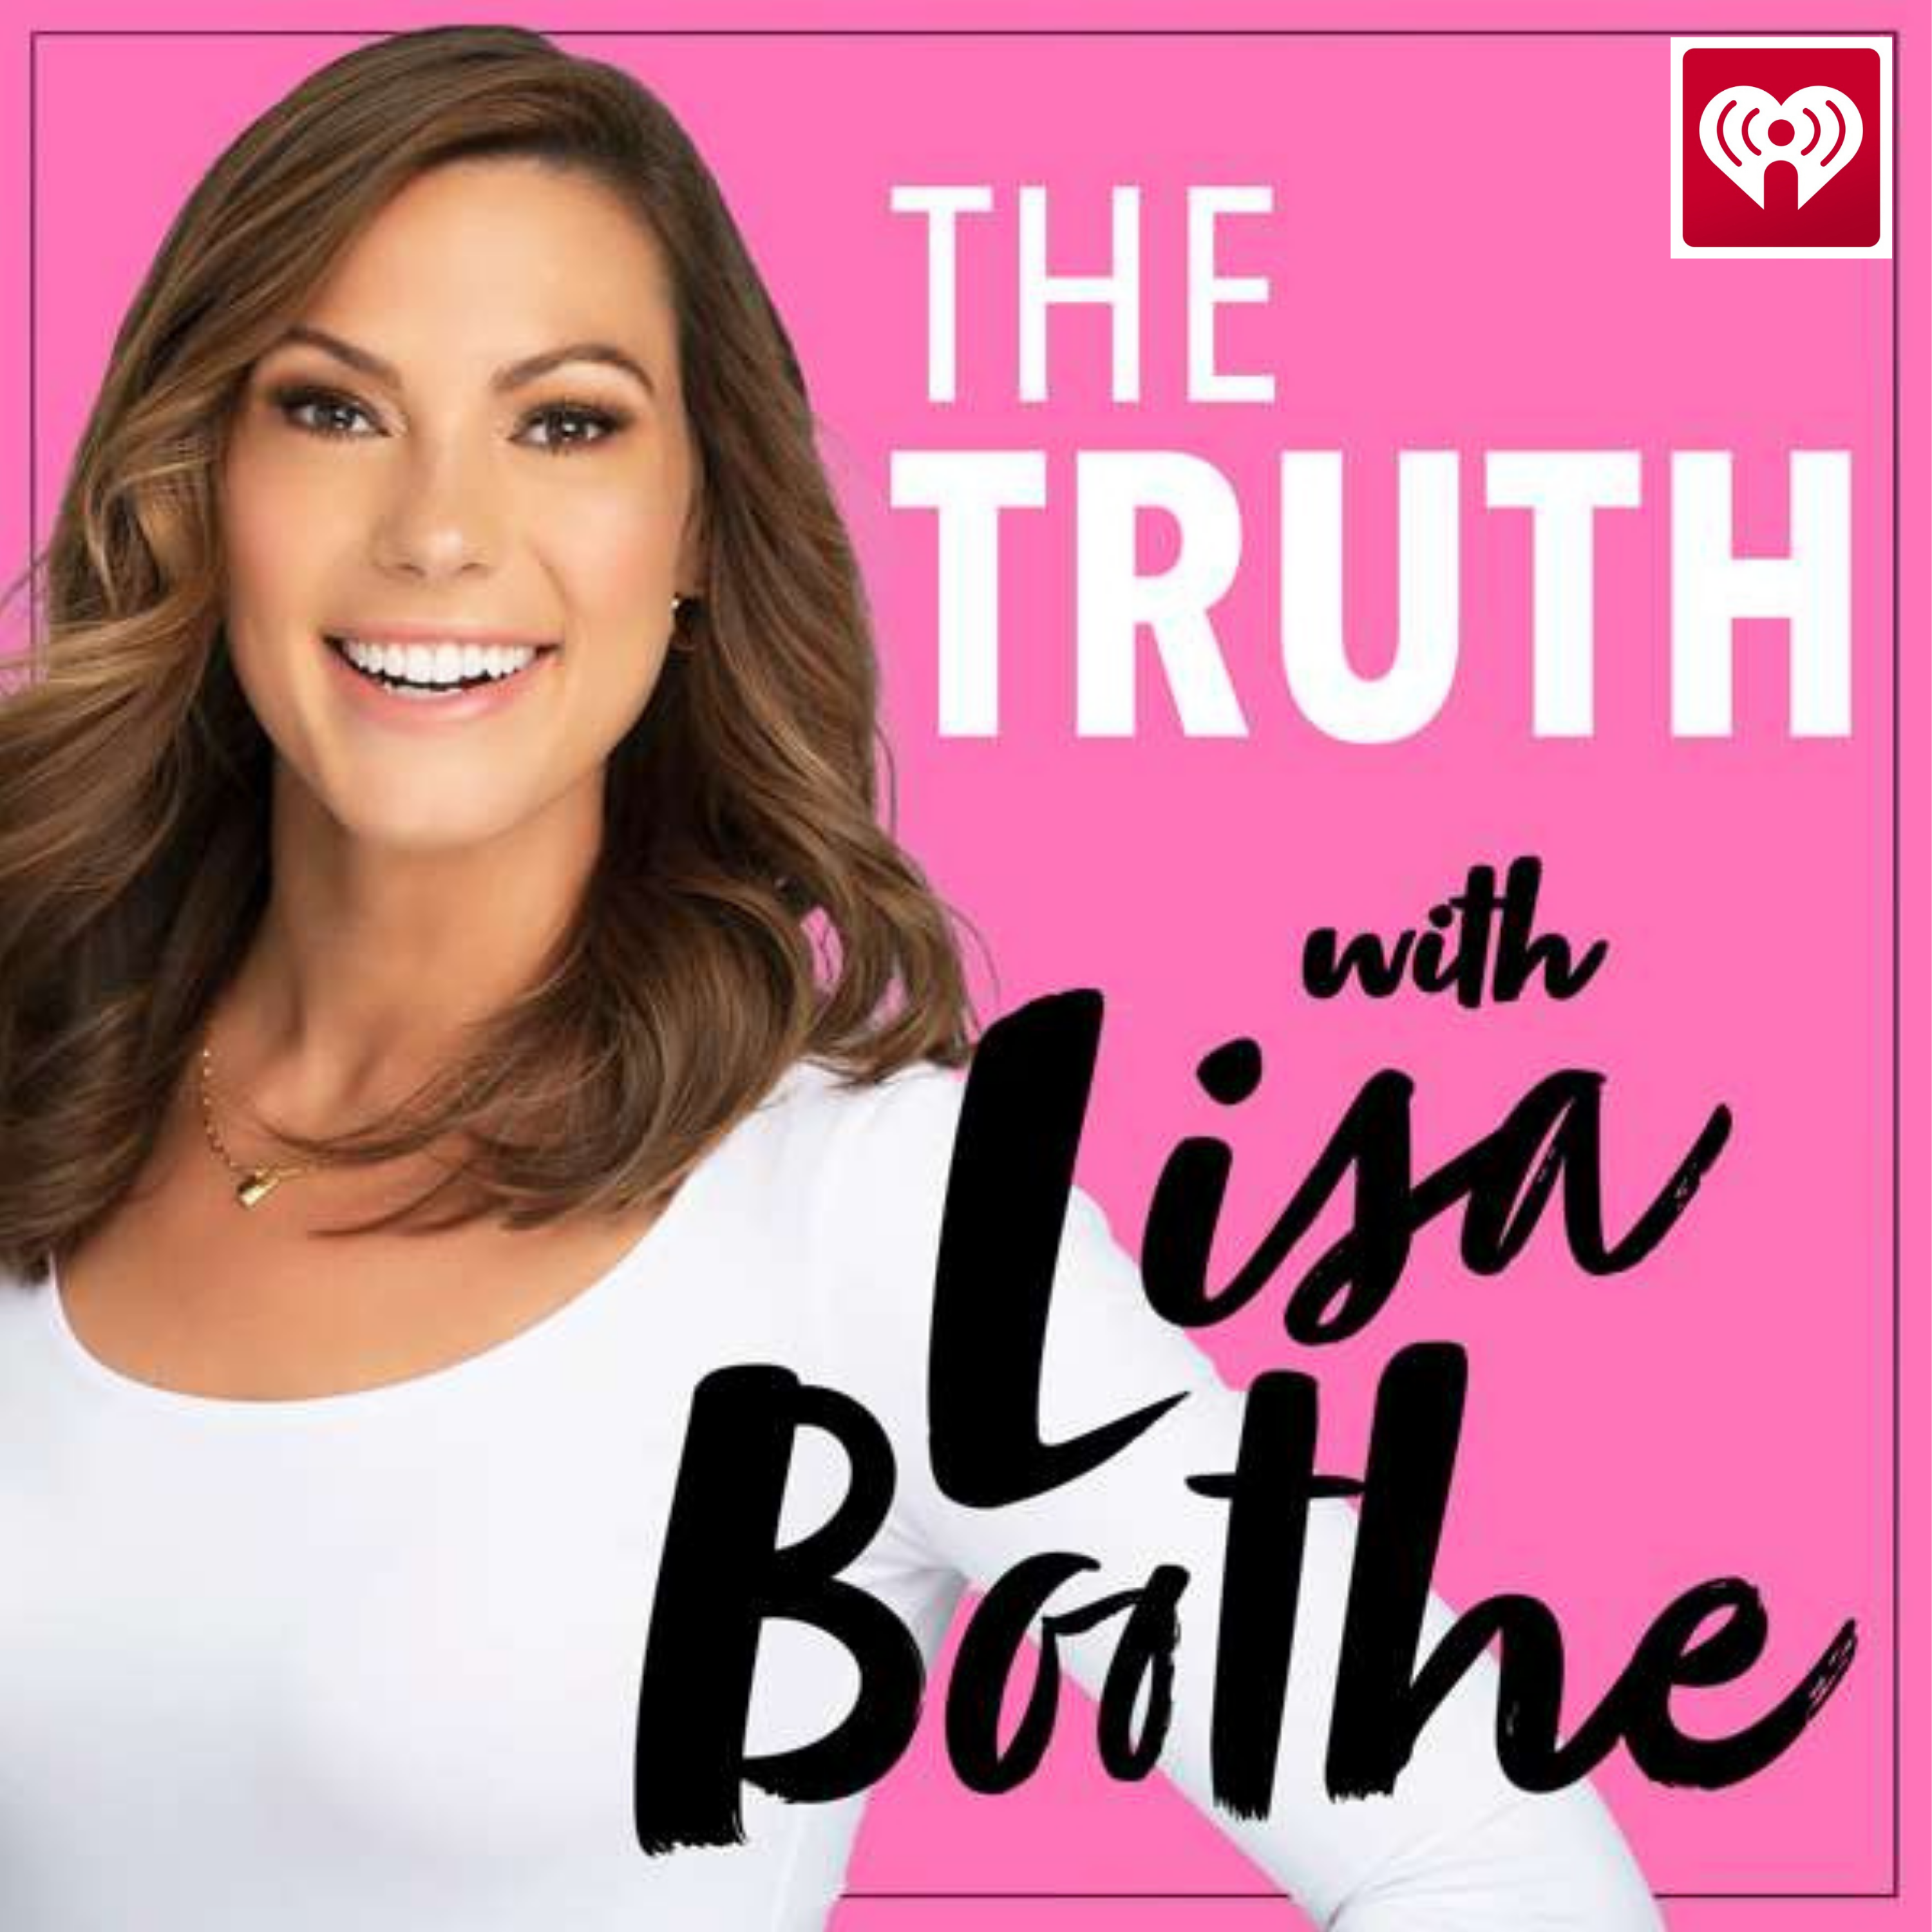 The Truth with Lisa Boothe: Inside Trump's Iowa Victory with Robert Cahaly